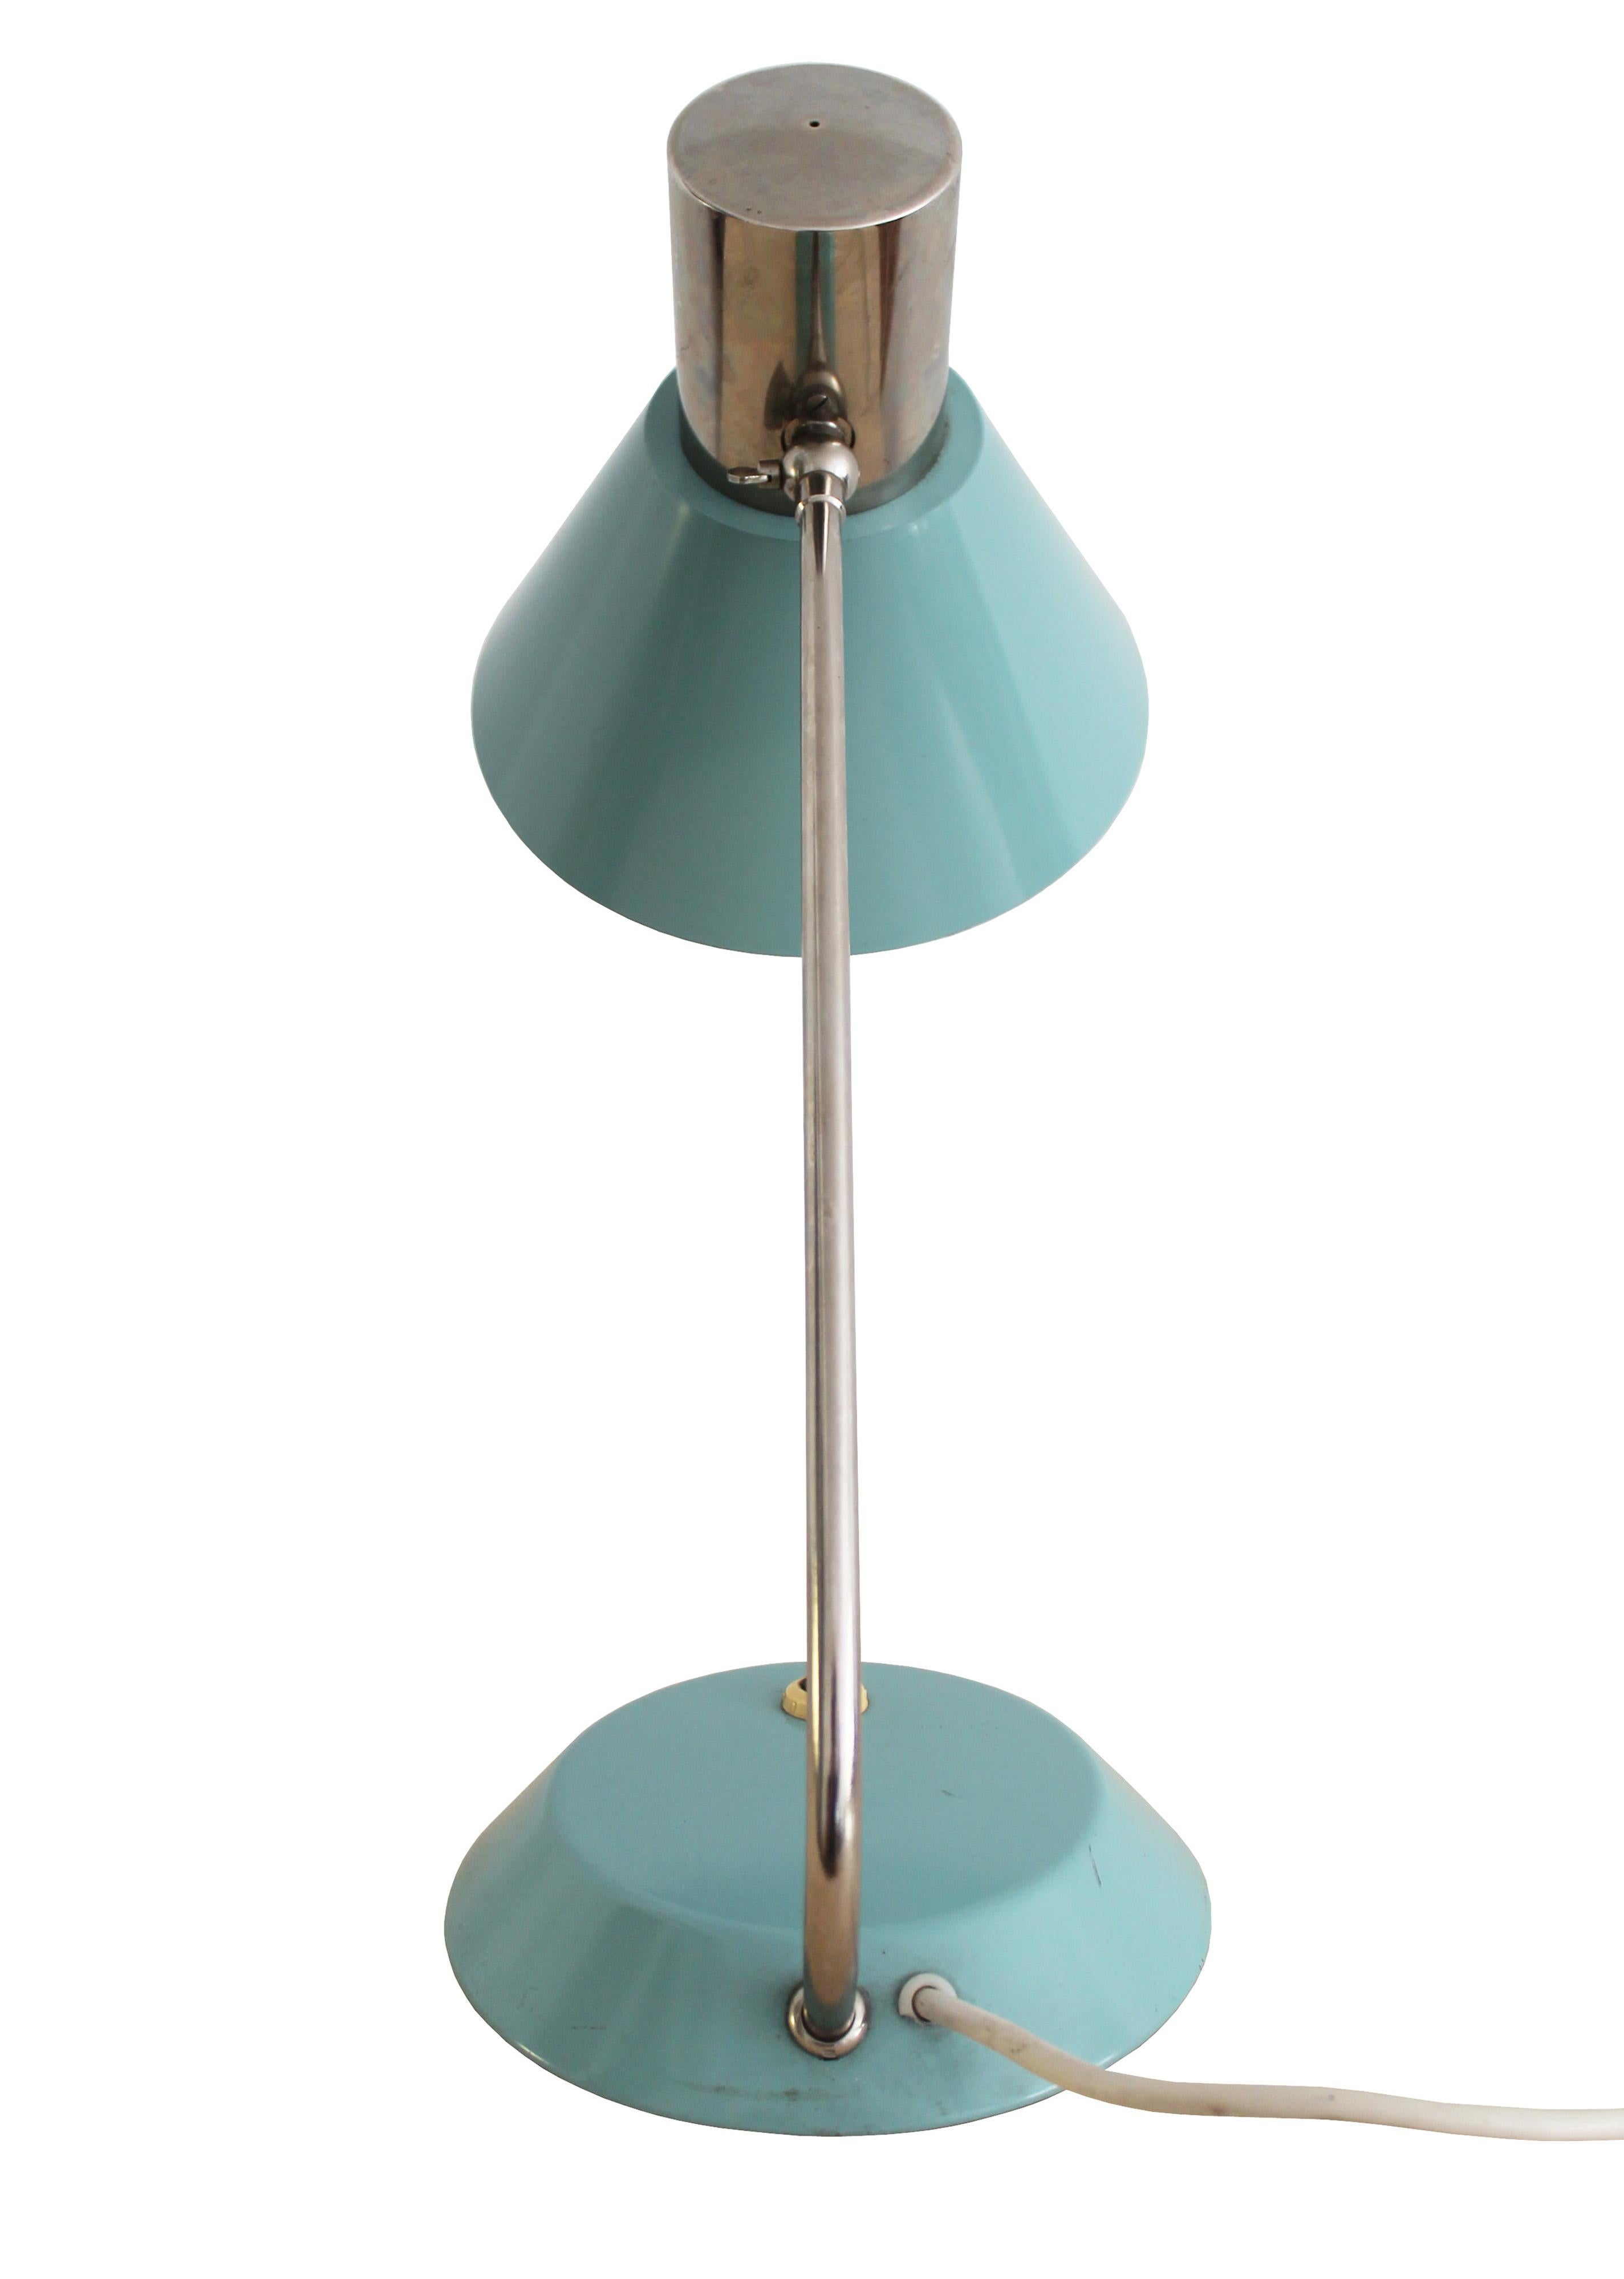 Czech Midcentury Industrial Table Lamp For Sale